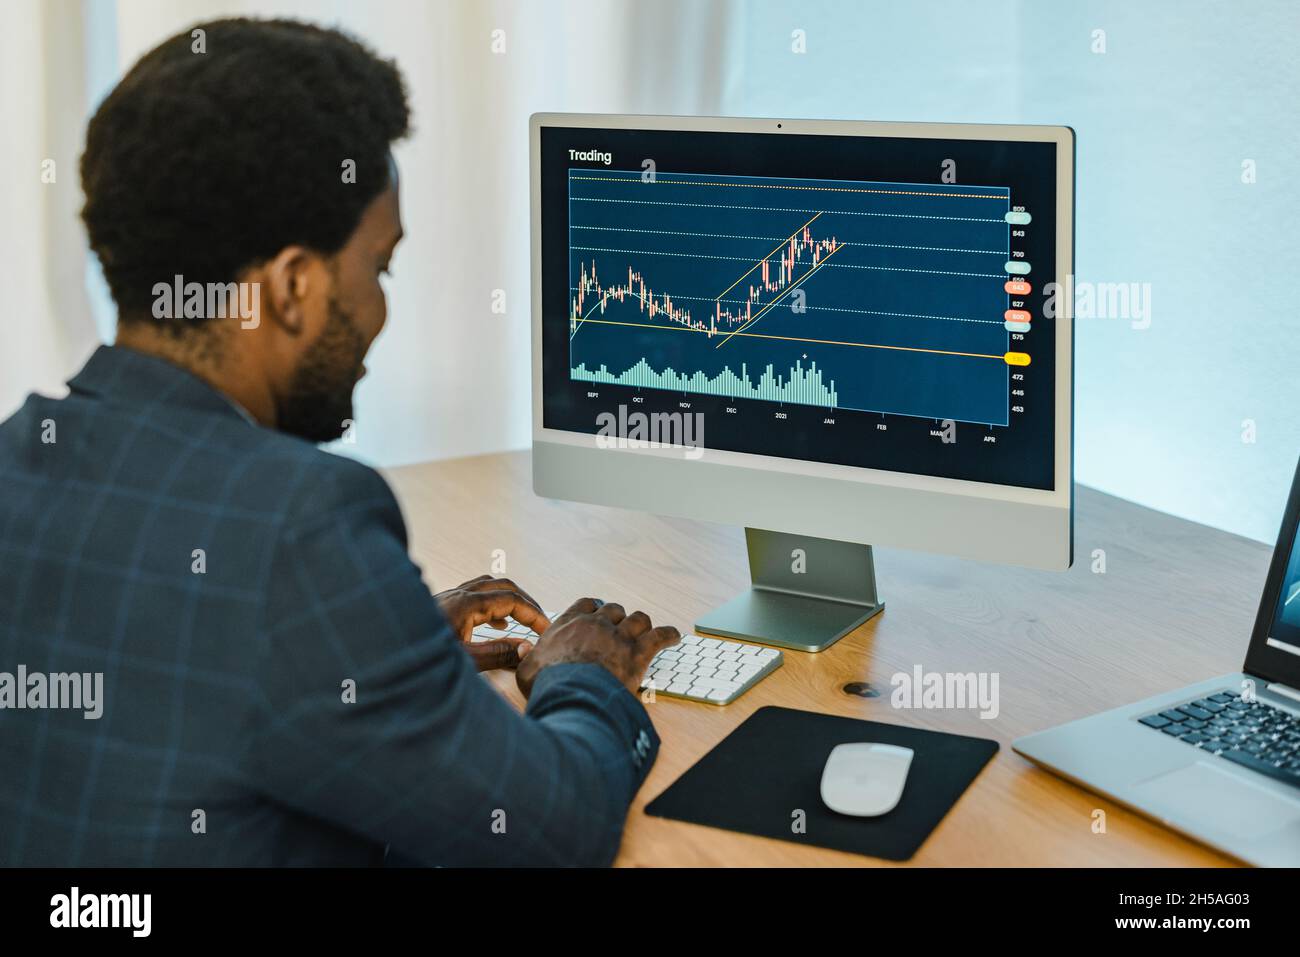 Black male trader typing on keyboard Stock Photo